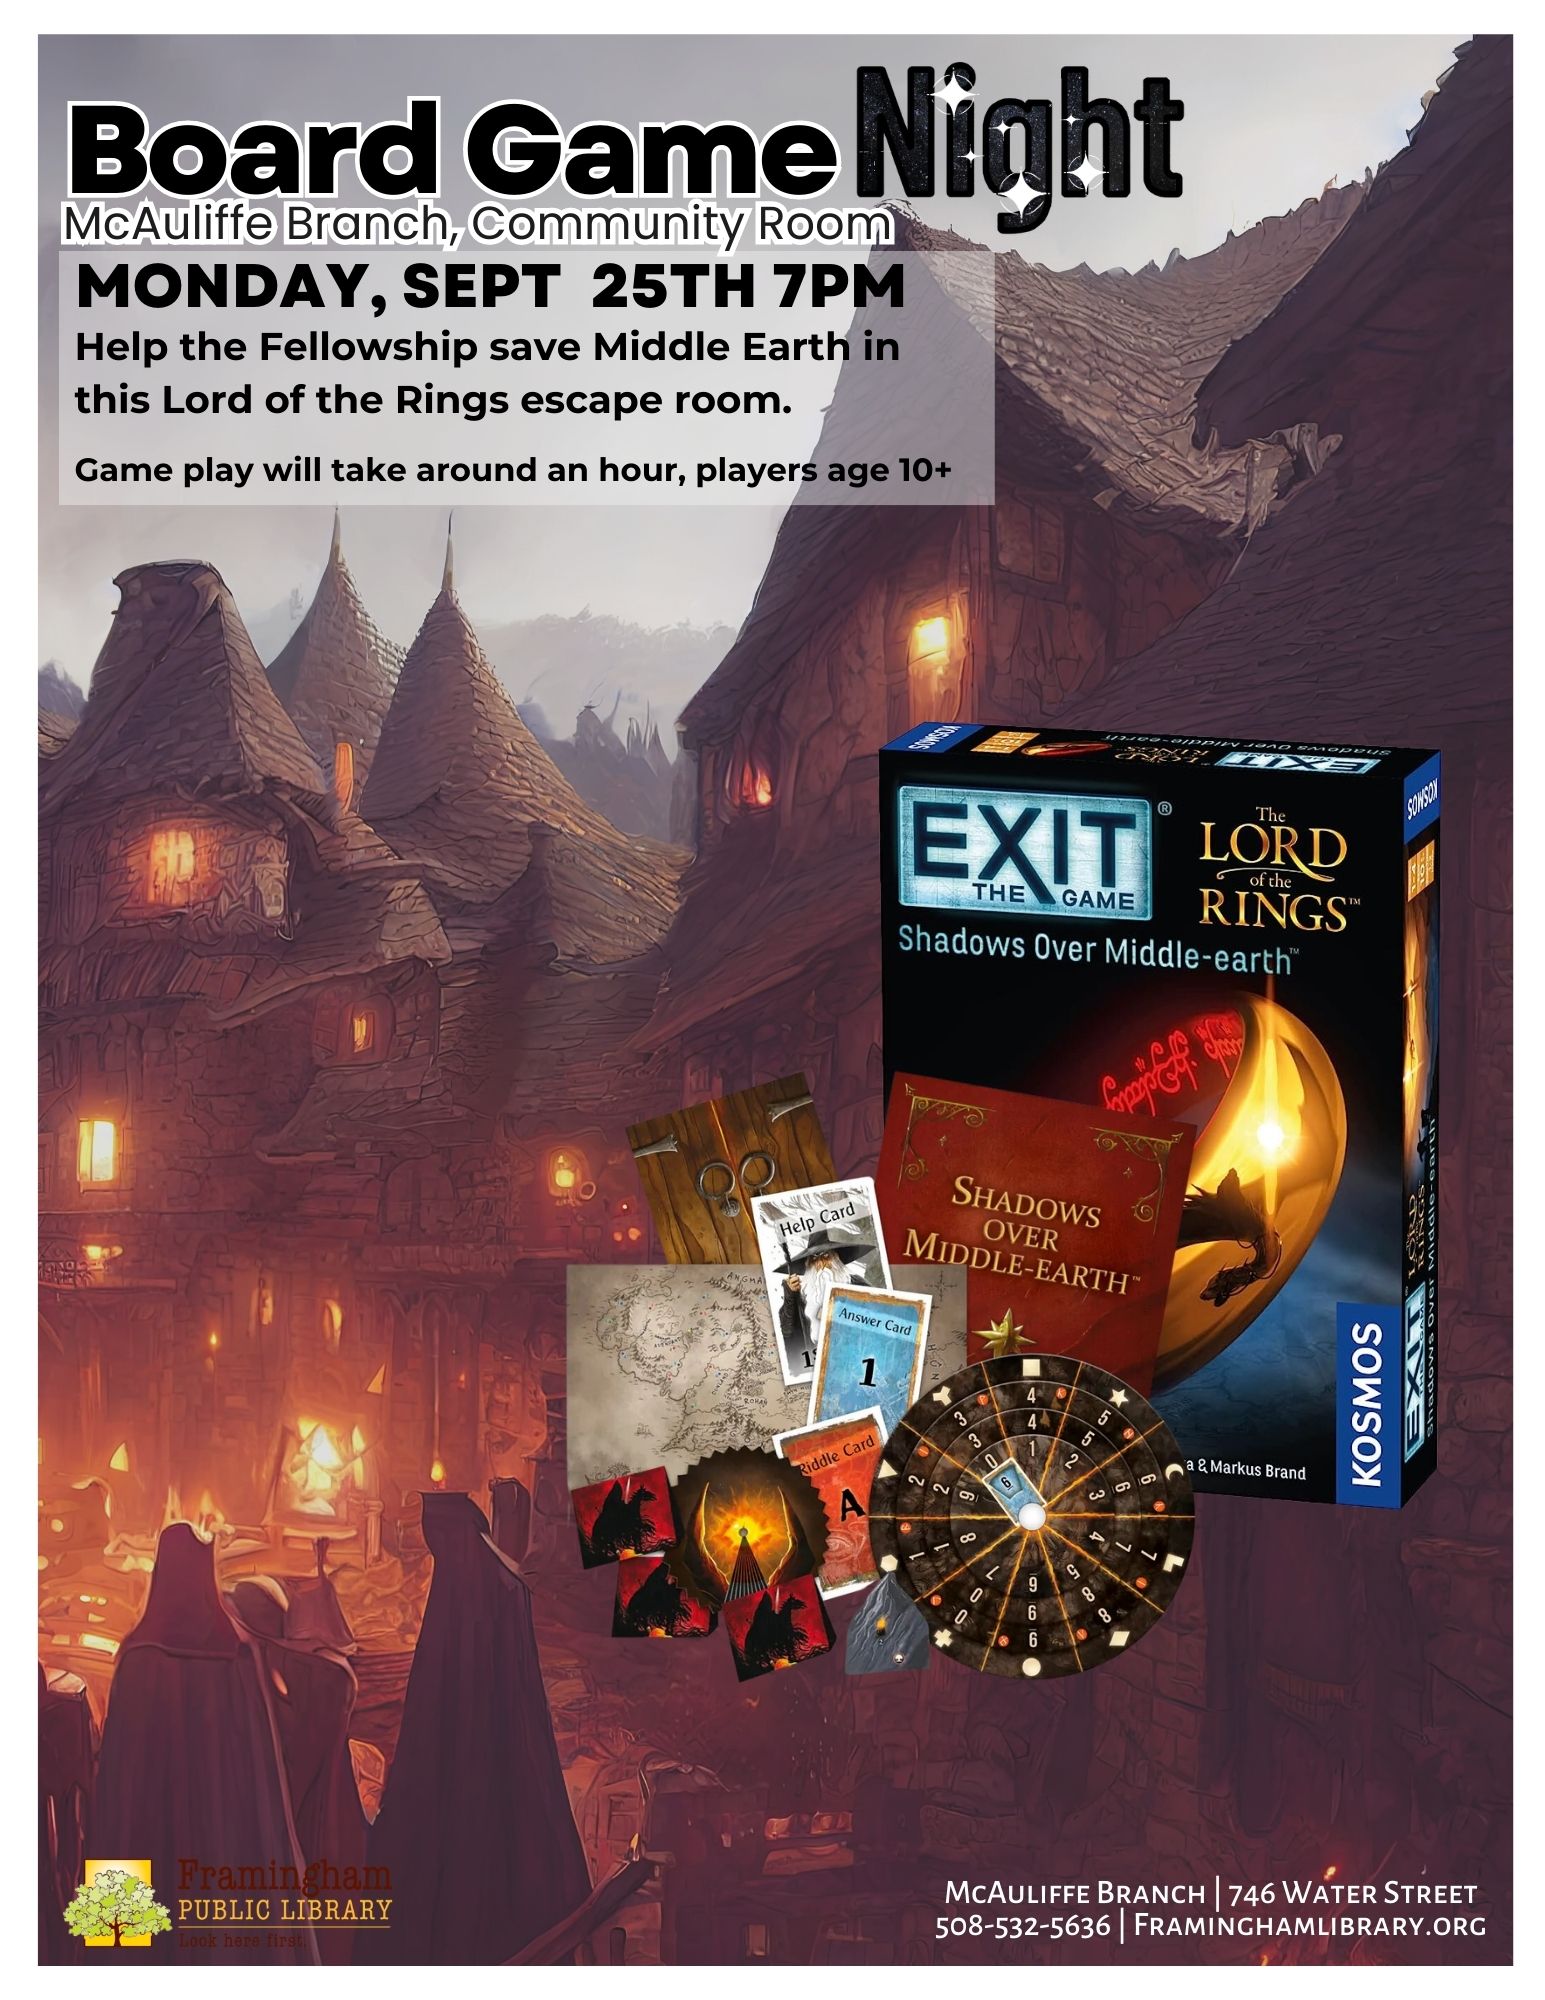 Board Game Night: Lord of the Rings escape room thumbnail Photo